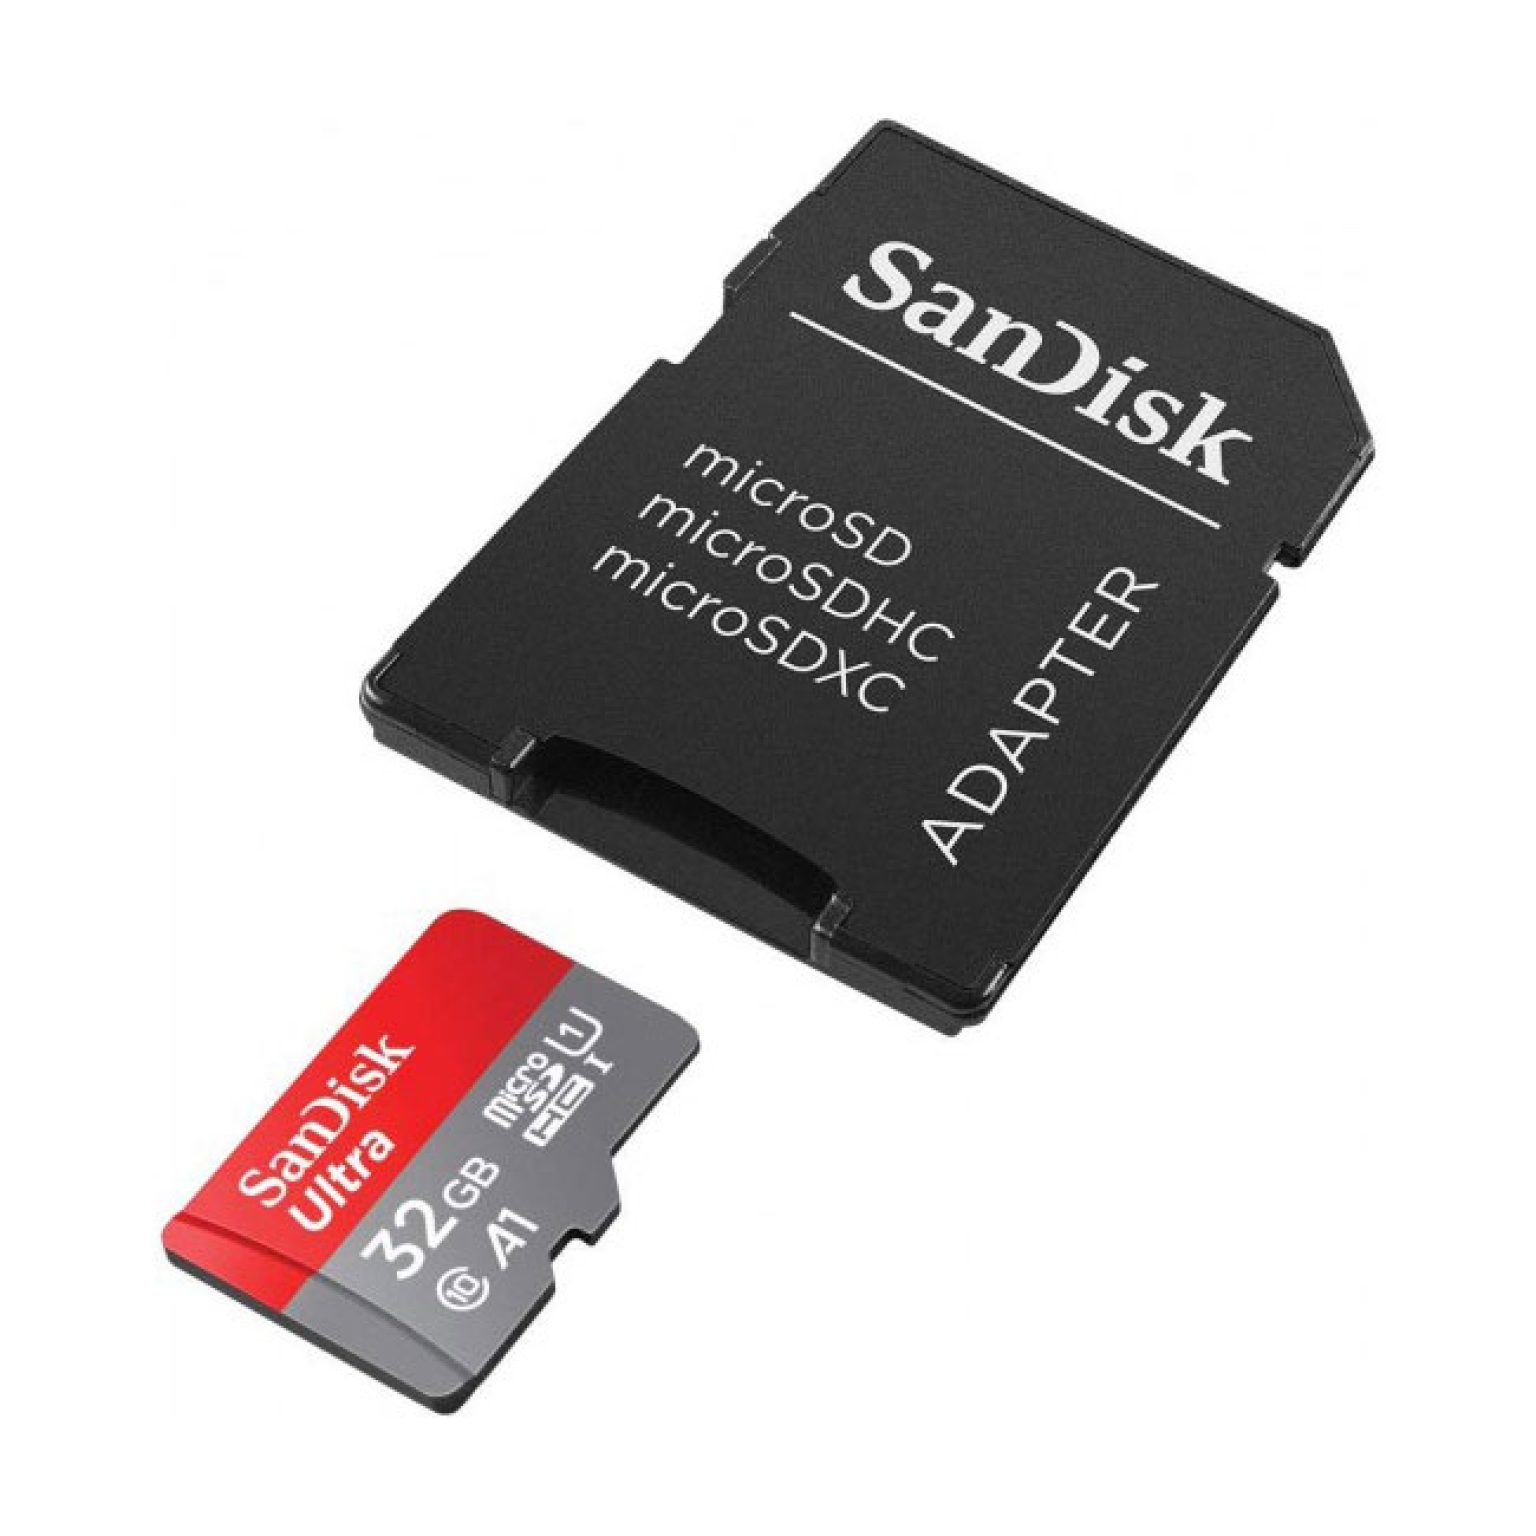 Sandisk Ultra microSDHC 32GB UHS I Card with Adapter 98 MB